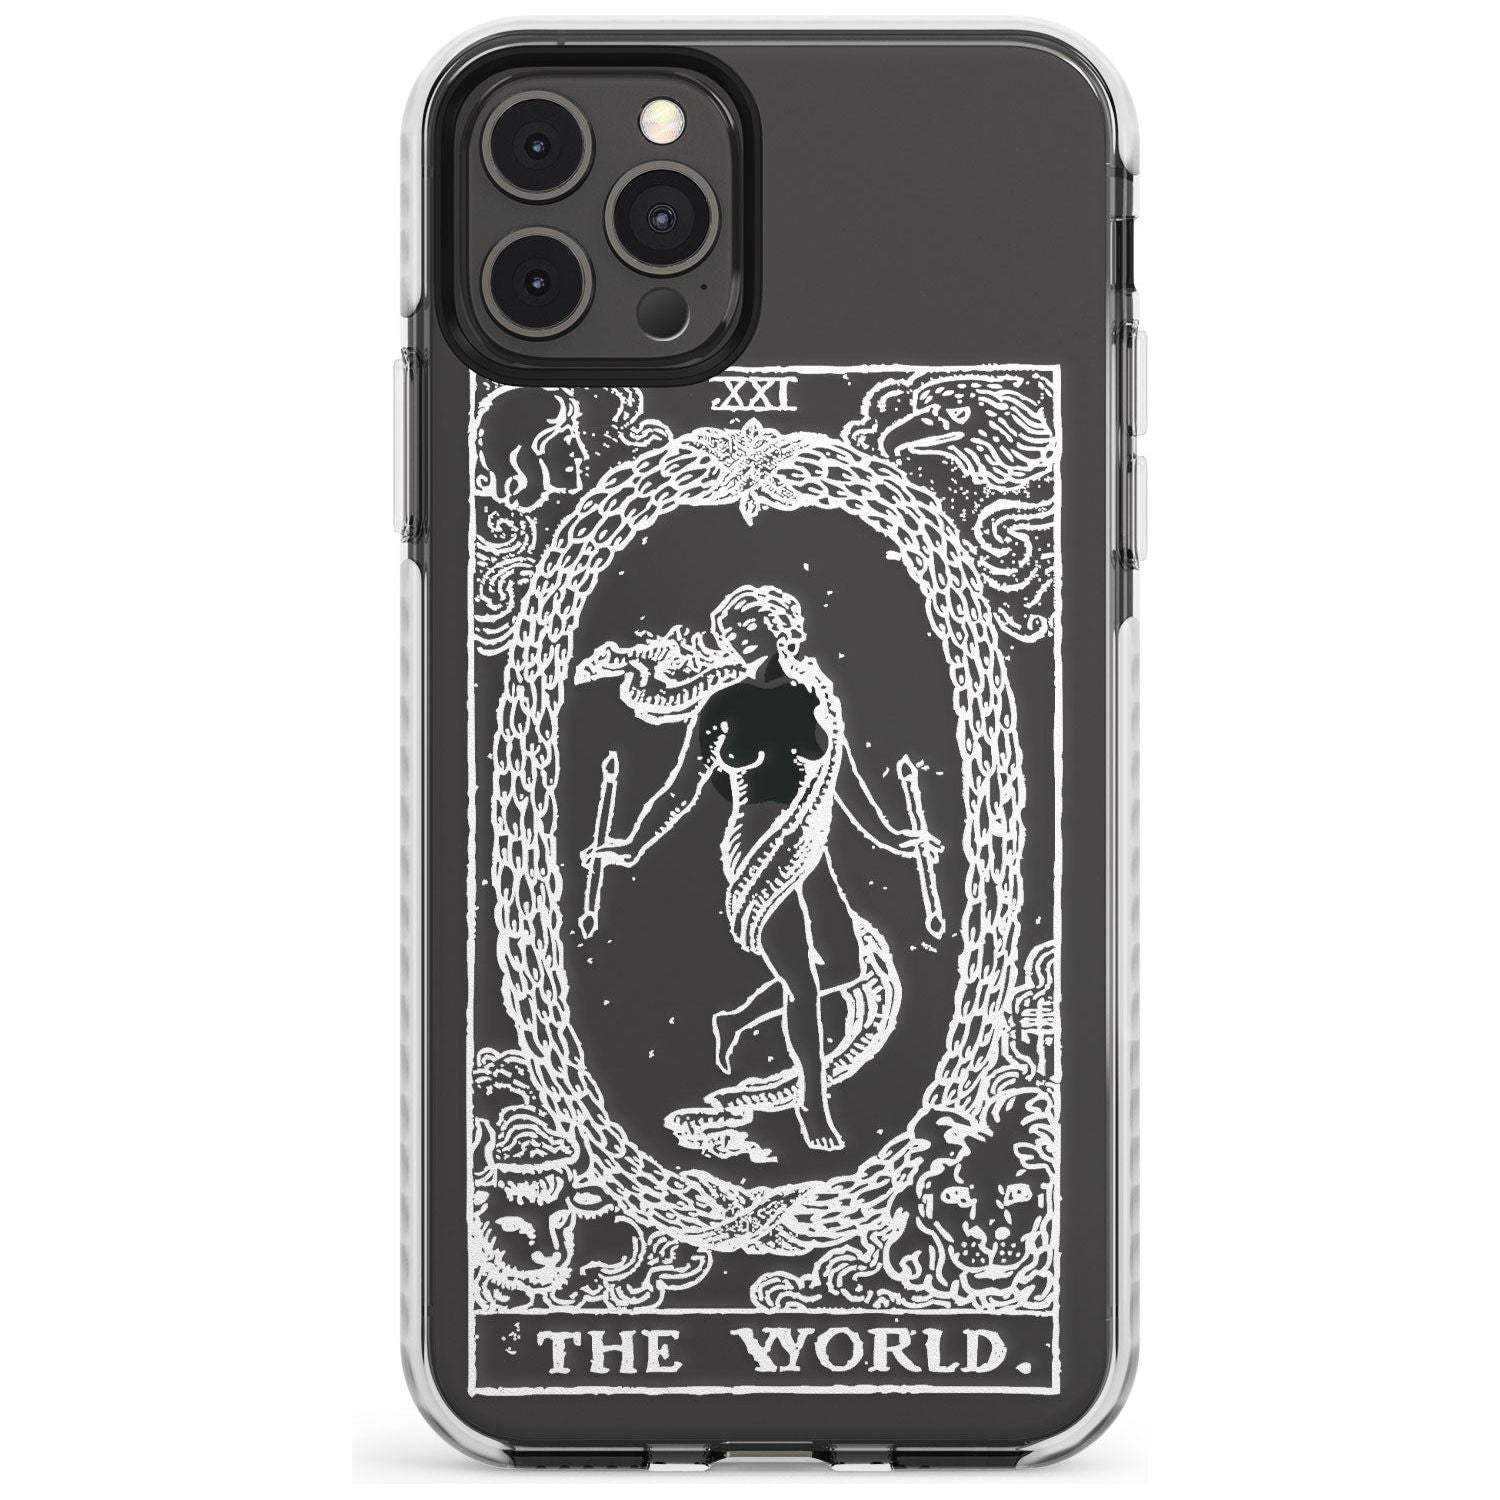 The World Tarot Card - White Transparent Slim TPU Phone Case for iPhone 11 Pro Max